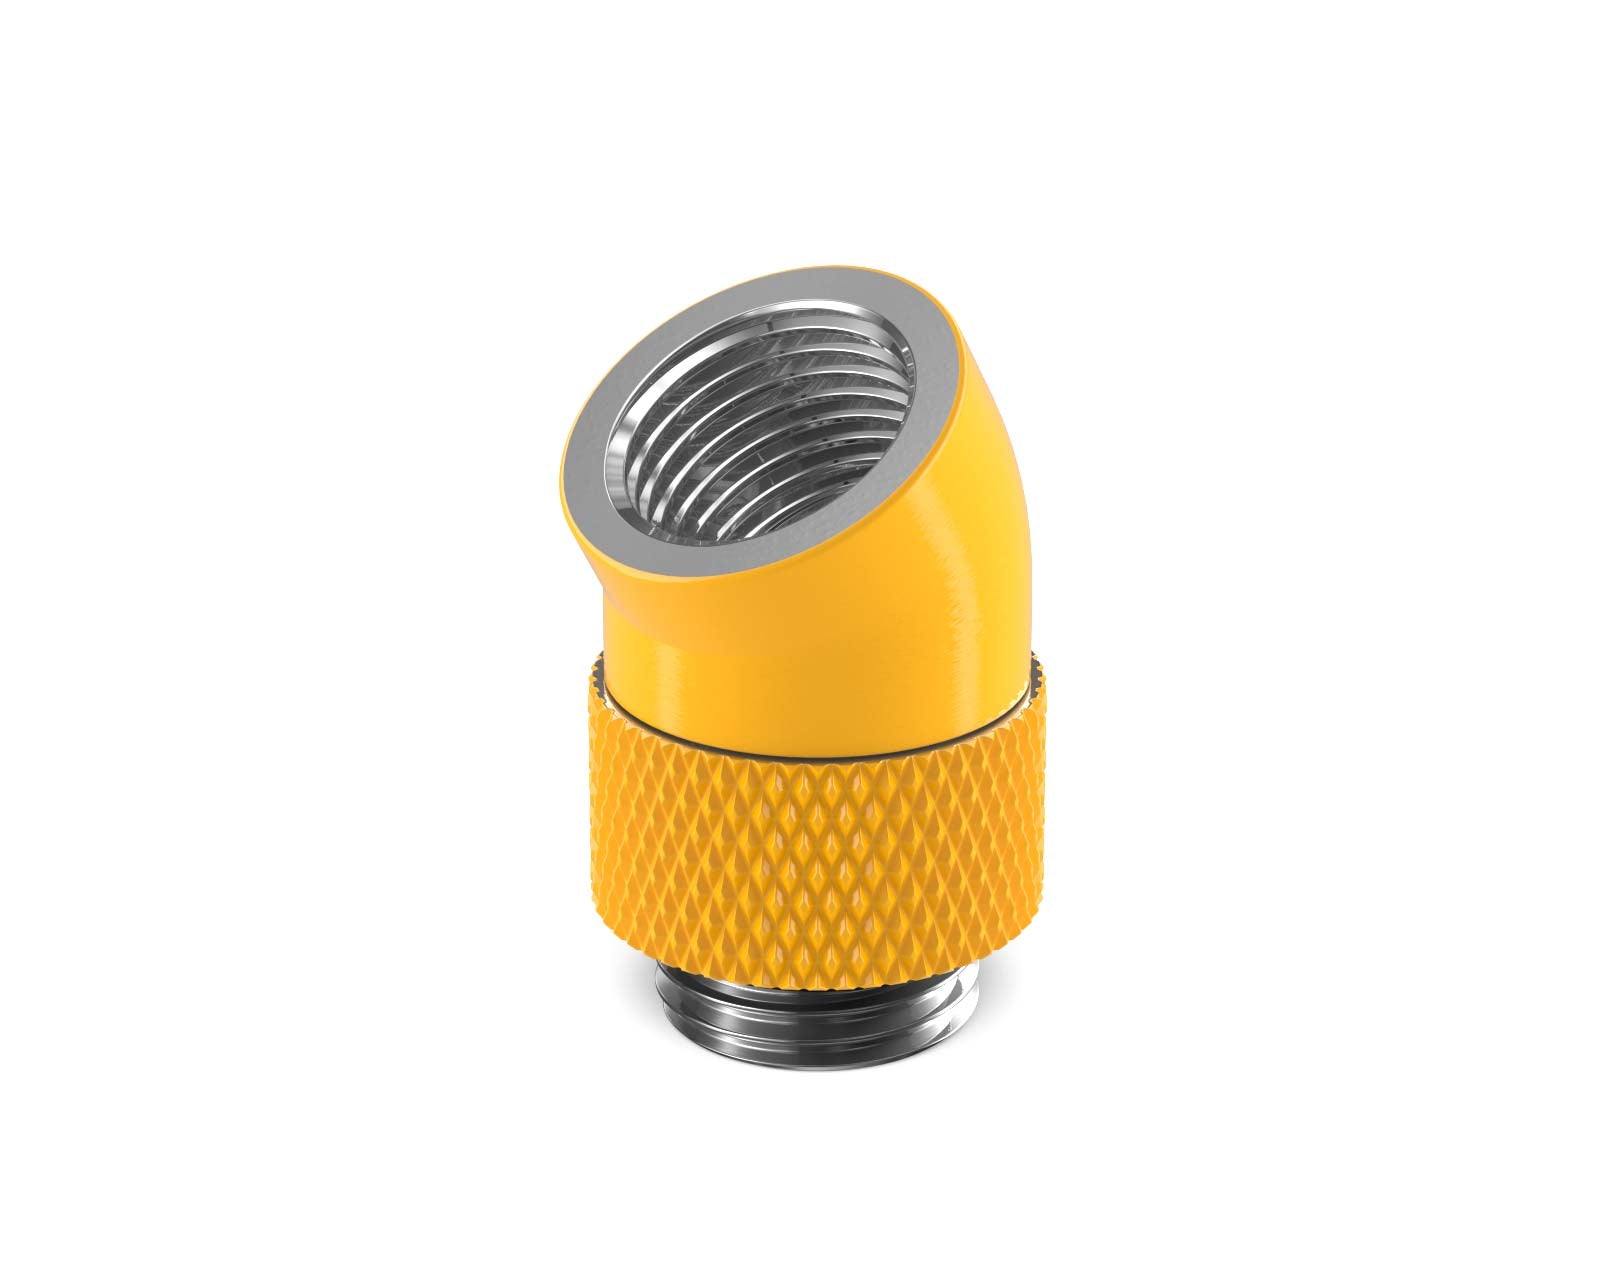 PrimoChill Male to Female G 1/4in. 30 Degree SX Rotary Elbow Fitting - PrimoChill - KEEPING IT COOL Yellow